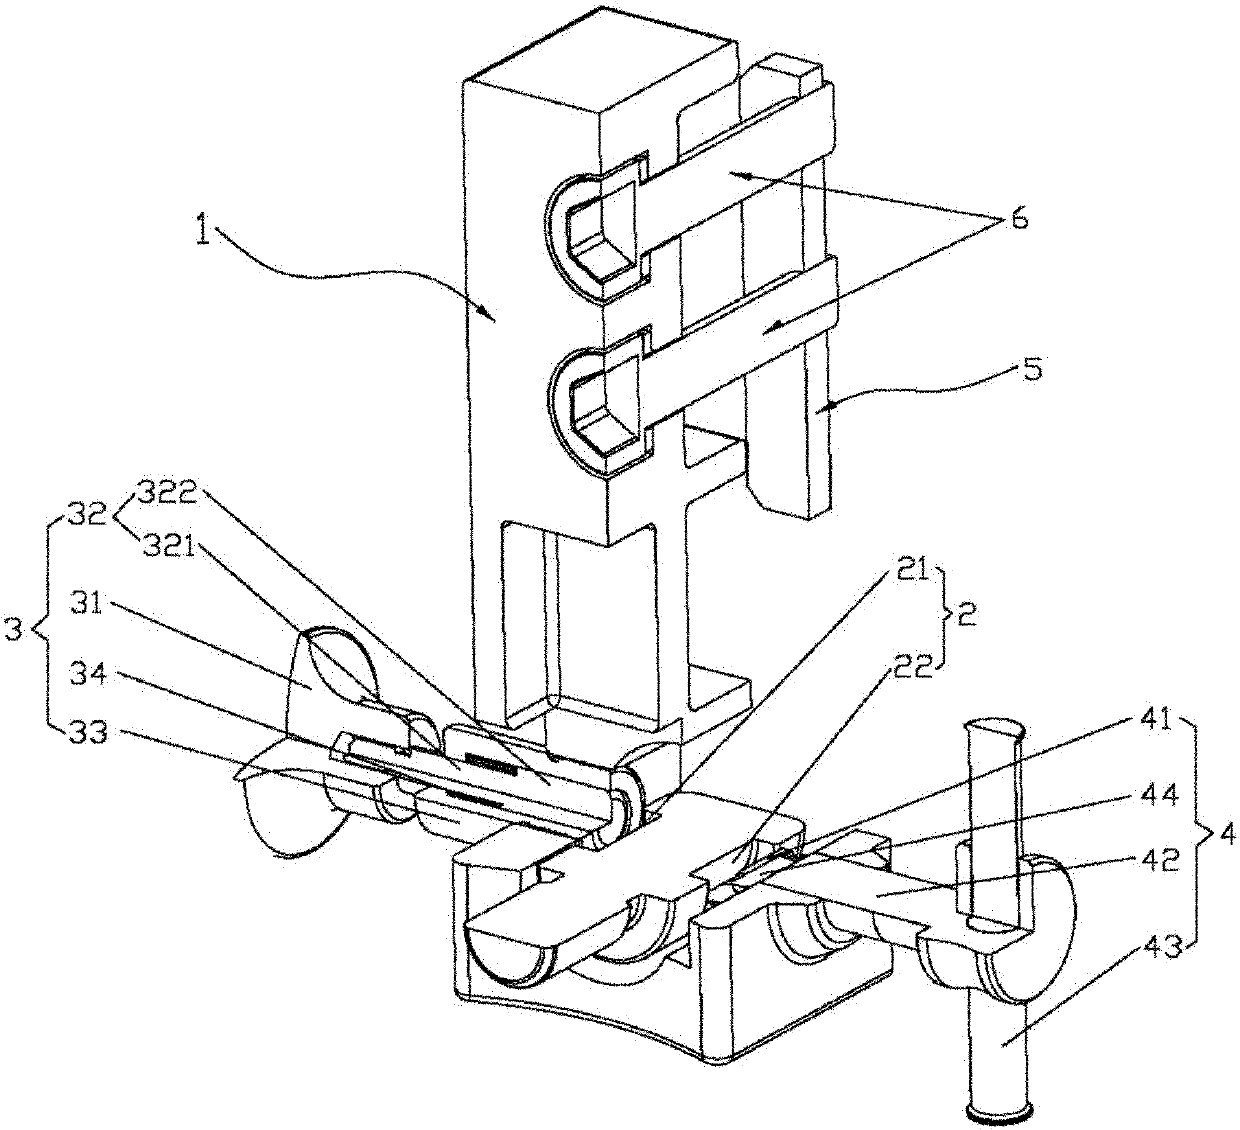 Locking structure with double-locking function and omnibearing automatic reflecting work light